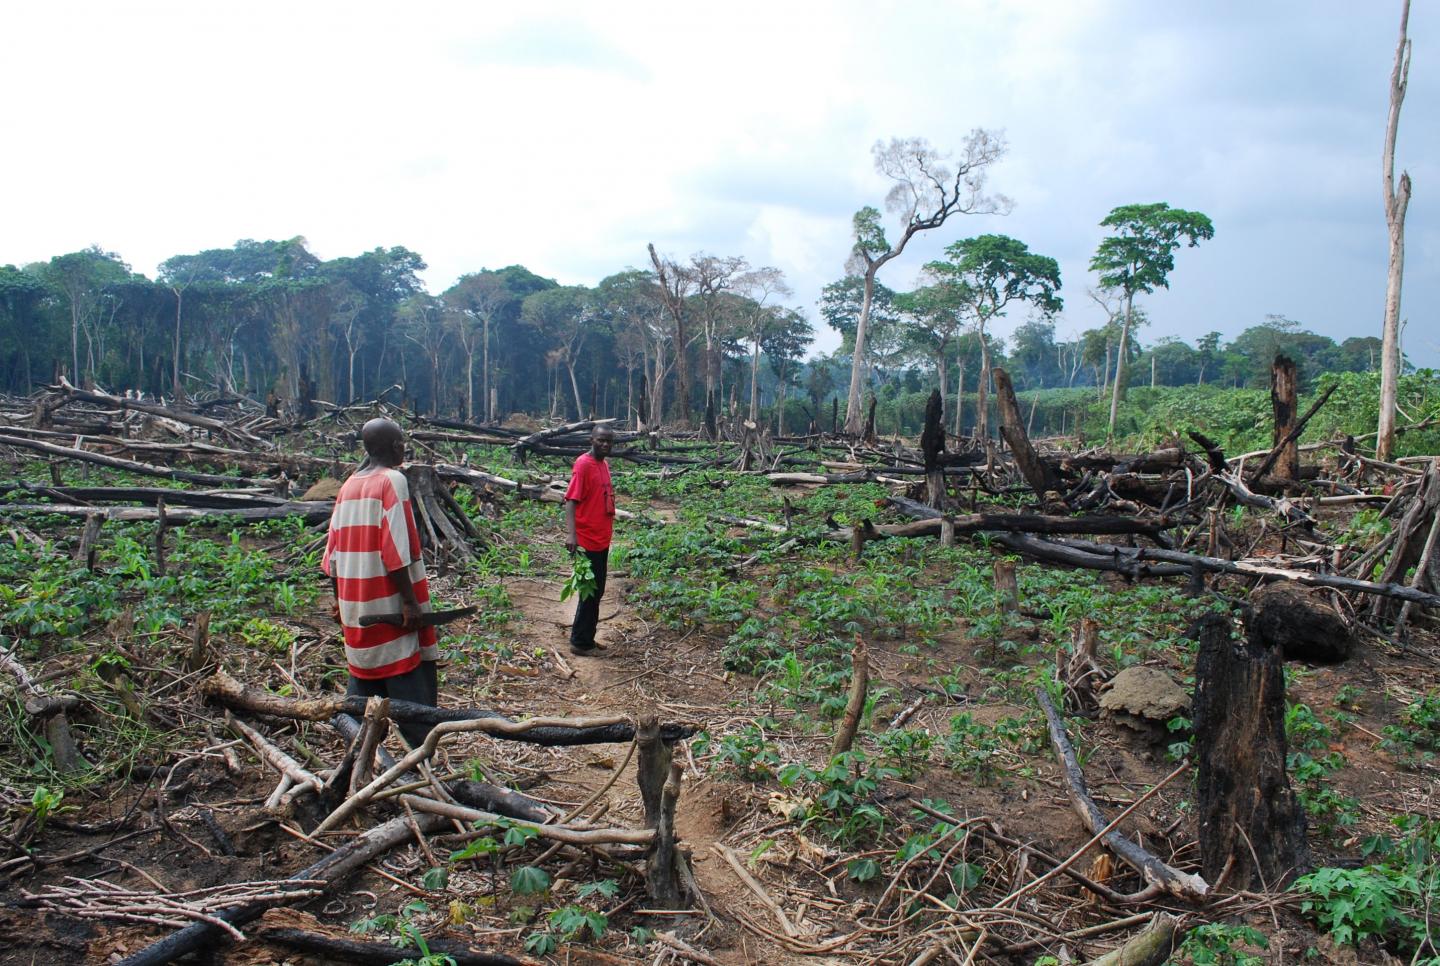 A recently burnt-down patch of forest in the vicinity of Yangambi in the central Congo Basin. In the background is the edge of the primary forest. The owner has planted a range of crops, including cassava and maize.